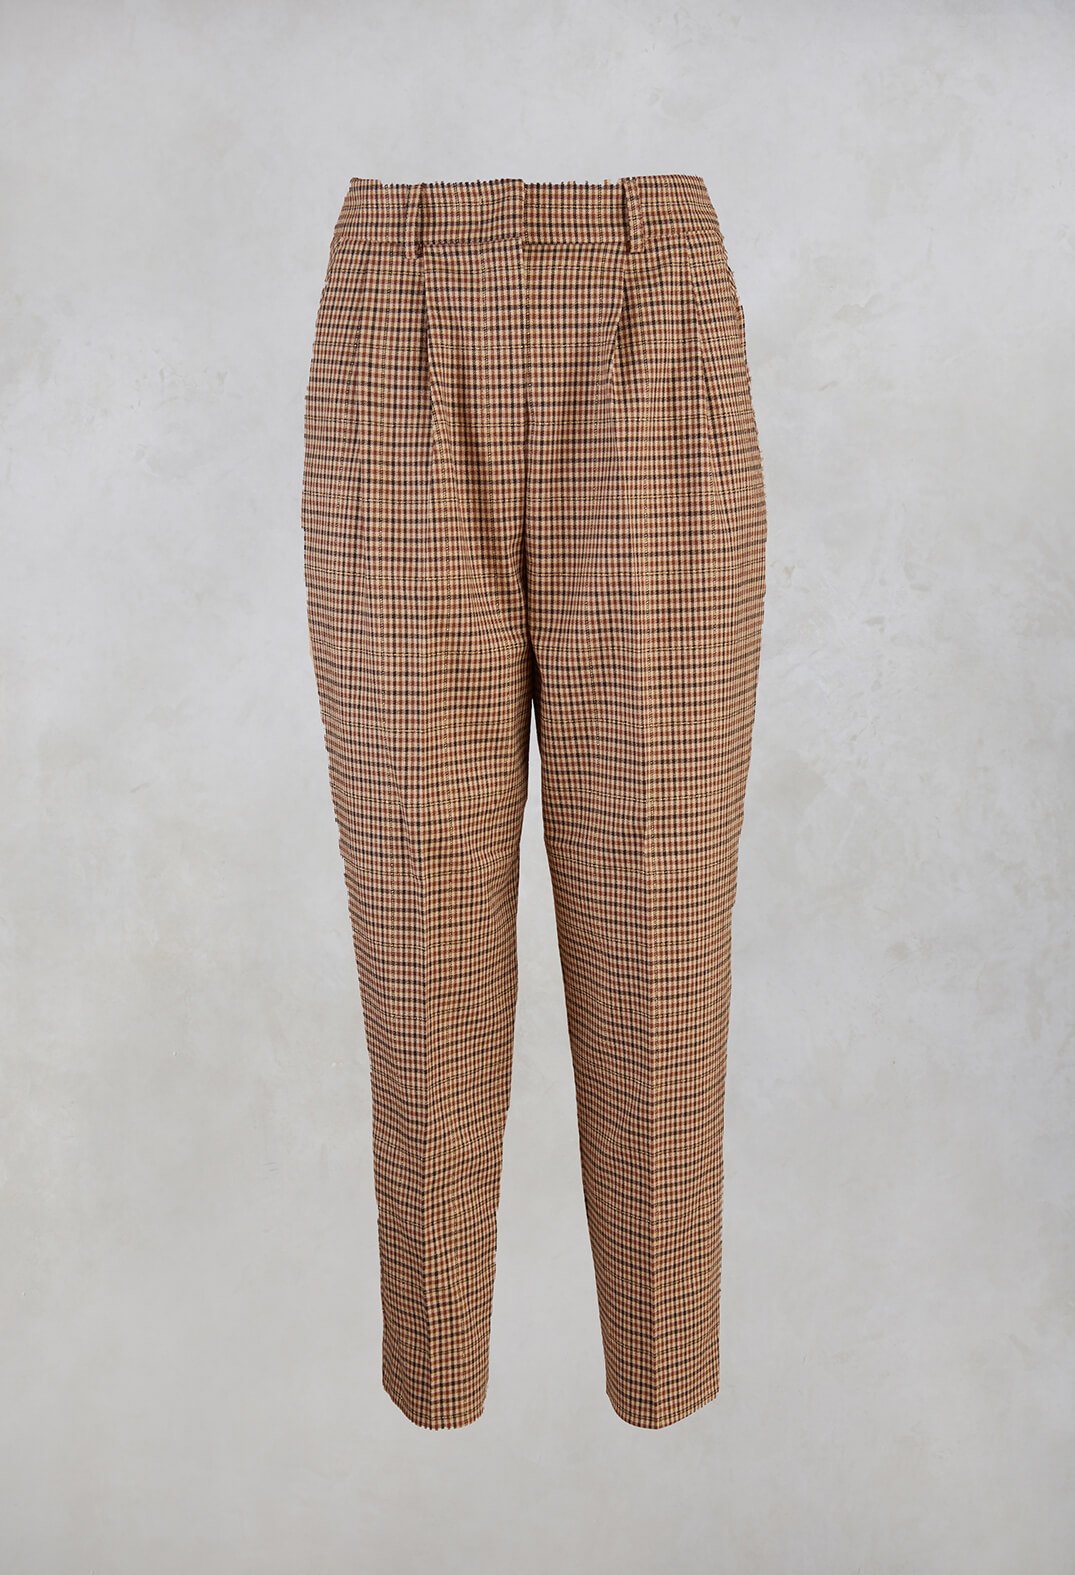 Beatrice B beige tailored dogtooth trousers